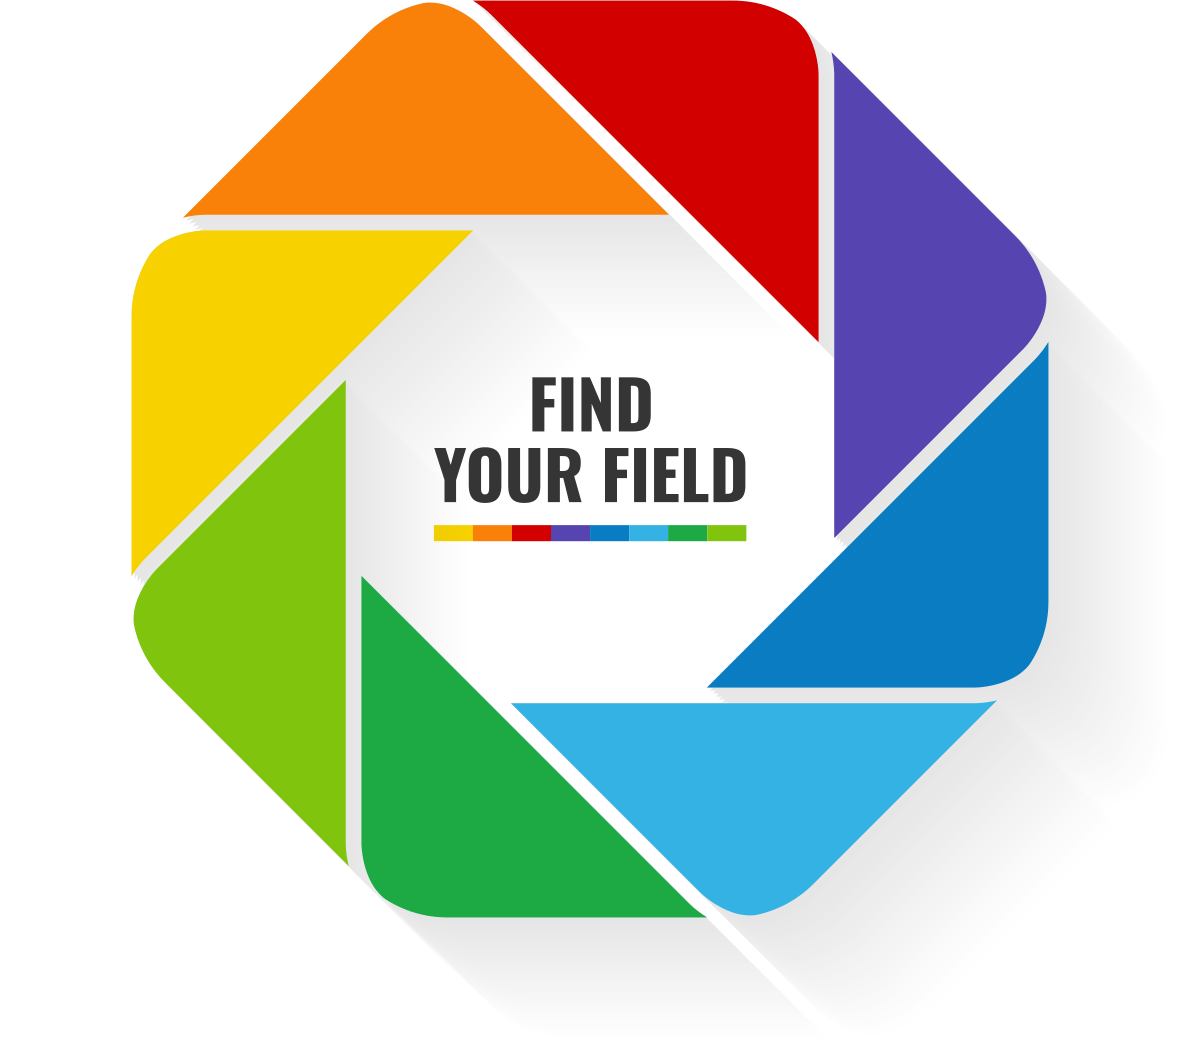 FIND YOUR FIELD